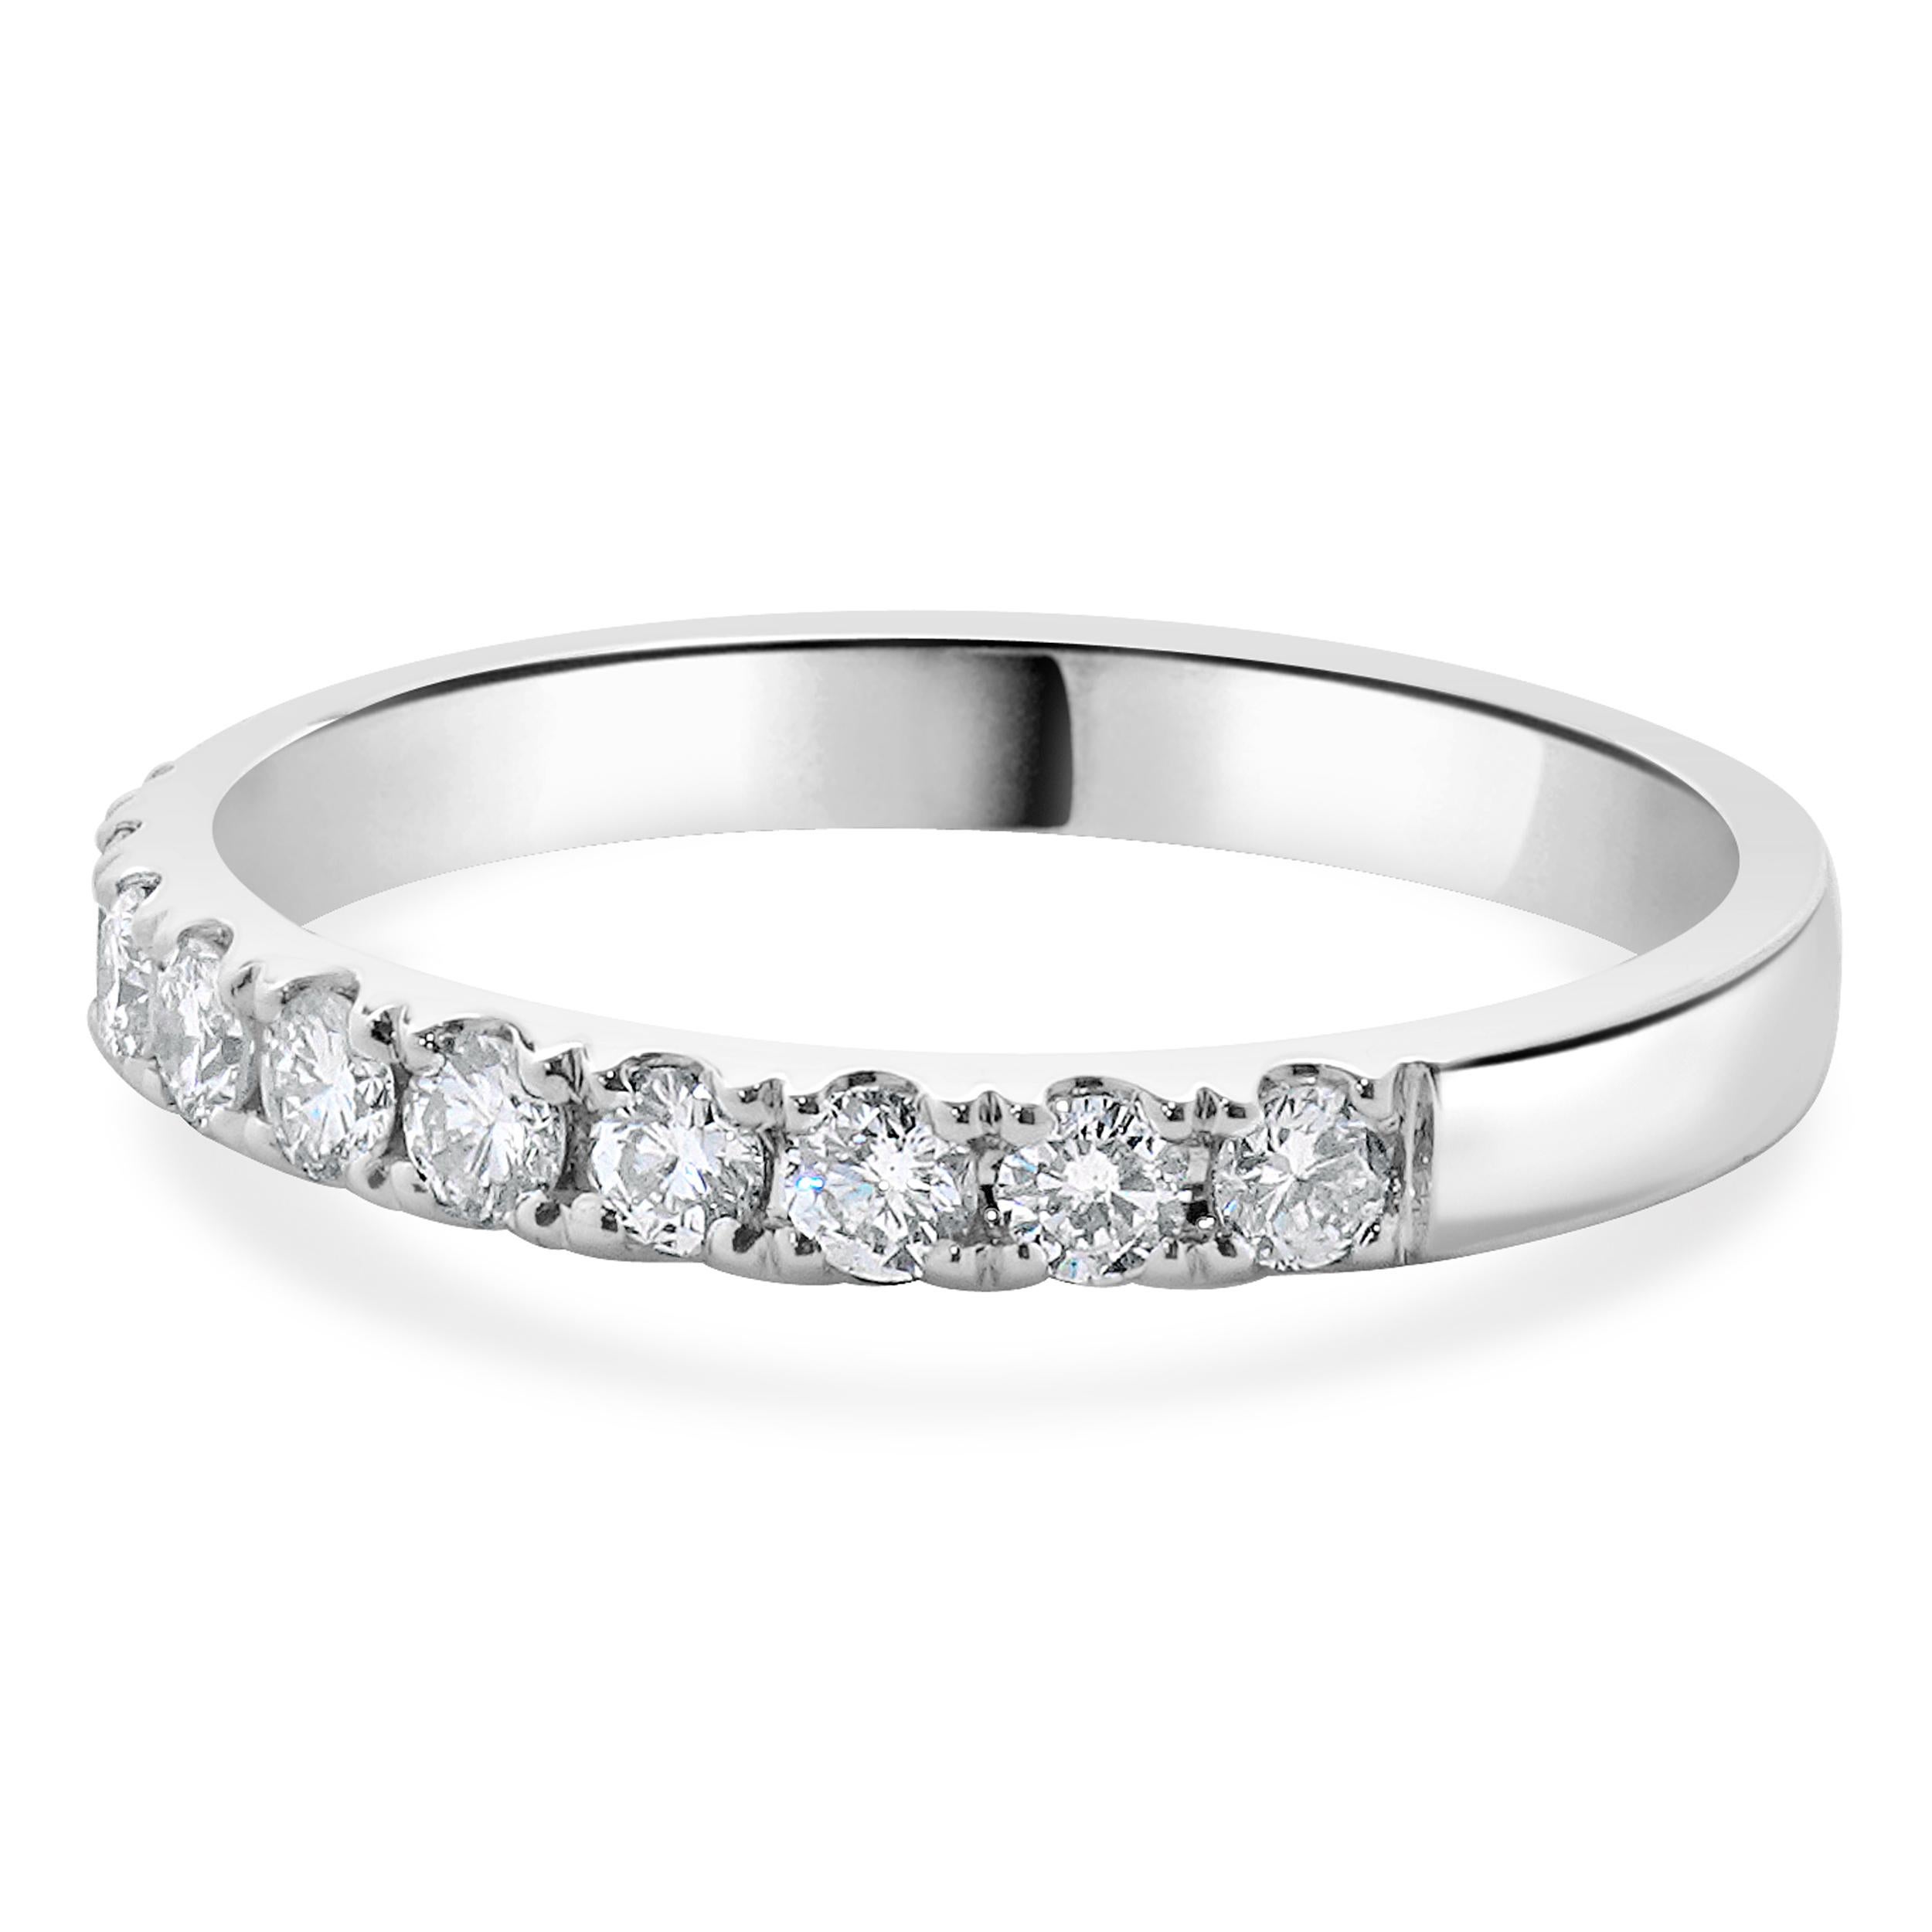 Designer: Custom
Material: 18K white gold
Diamonds: 15 round brilliant cut = 0.52cttw
Color: G
Clarity: VS2-SI1
Size: 6 sizing available 
Dimensions: ring top measures 2 mm in width
Weight: 2.27 grams
